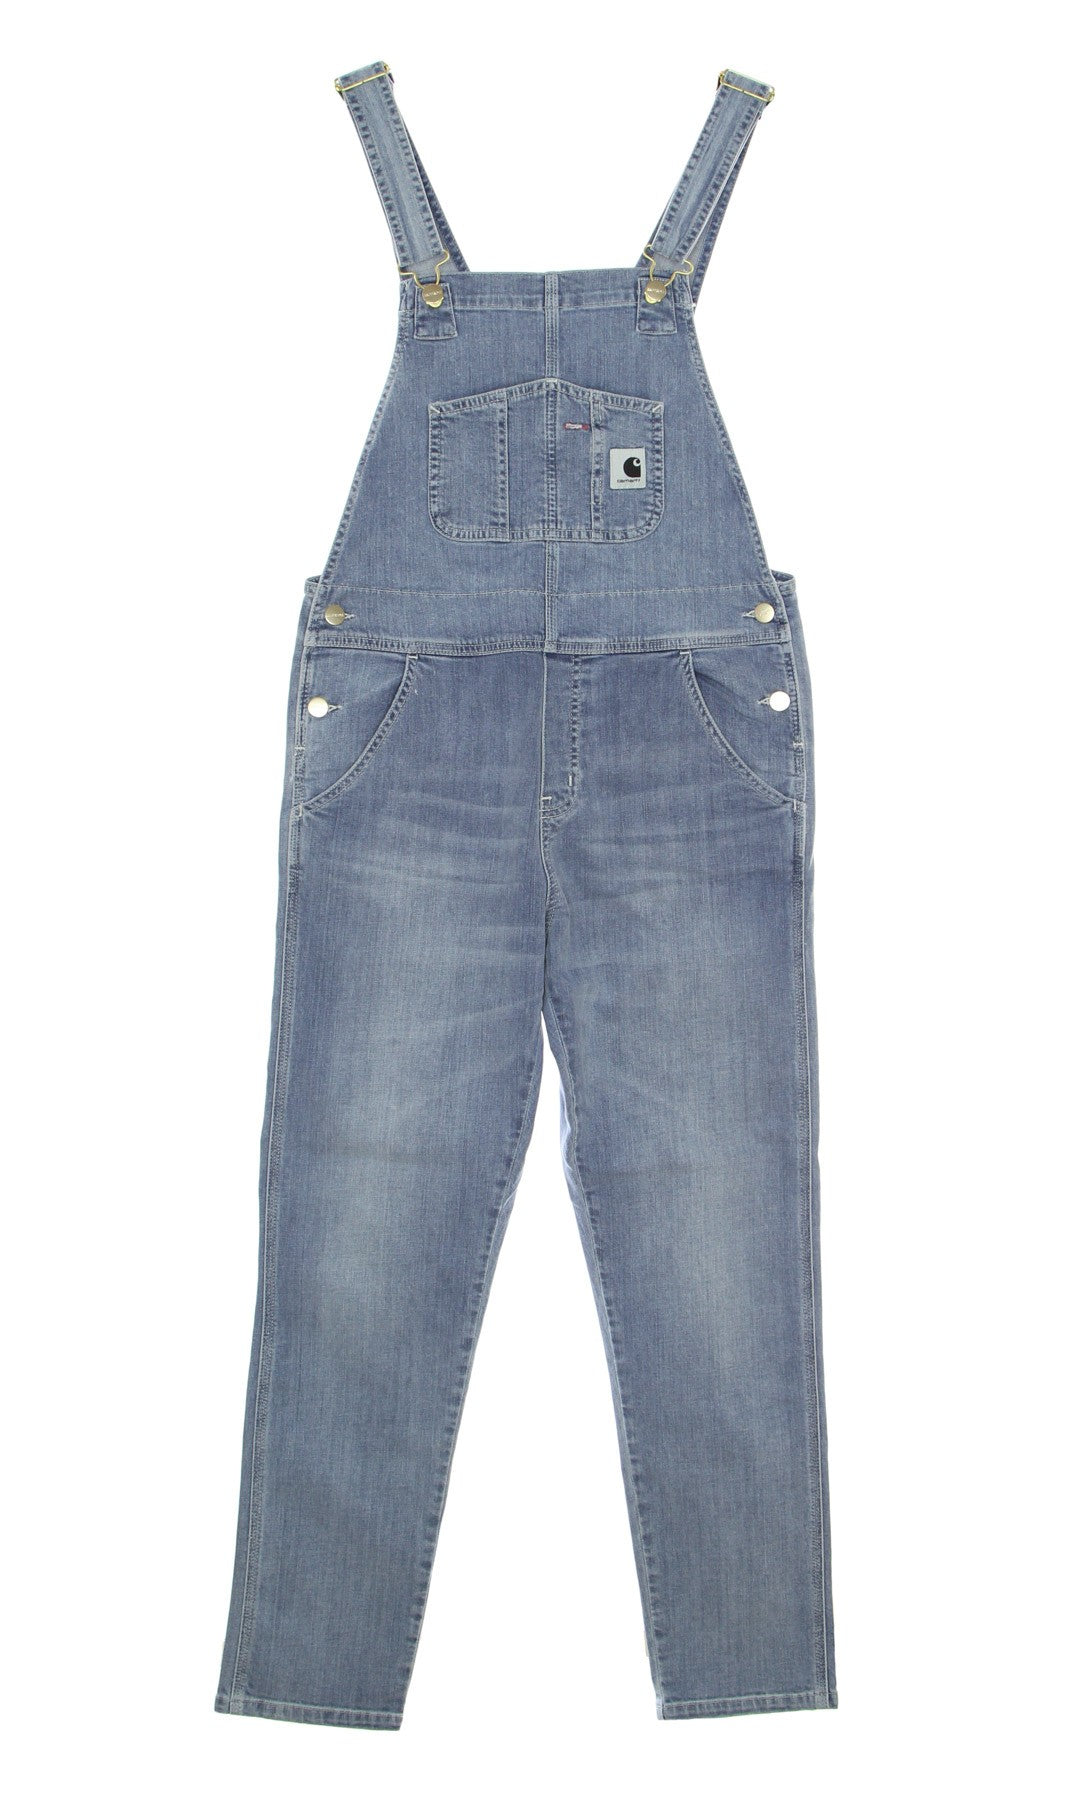 Women's W Bib Overall Dungarees Blue Light Stone Washed